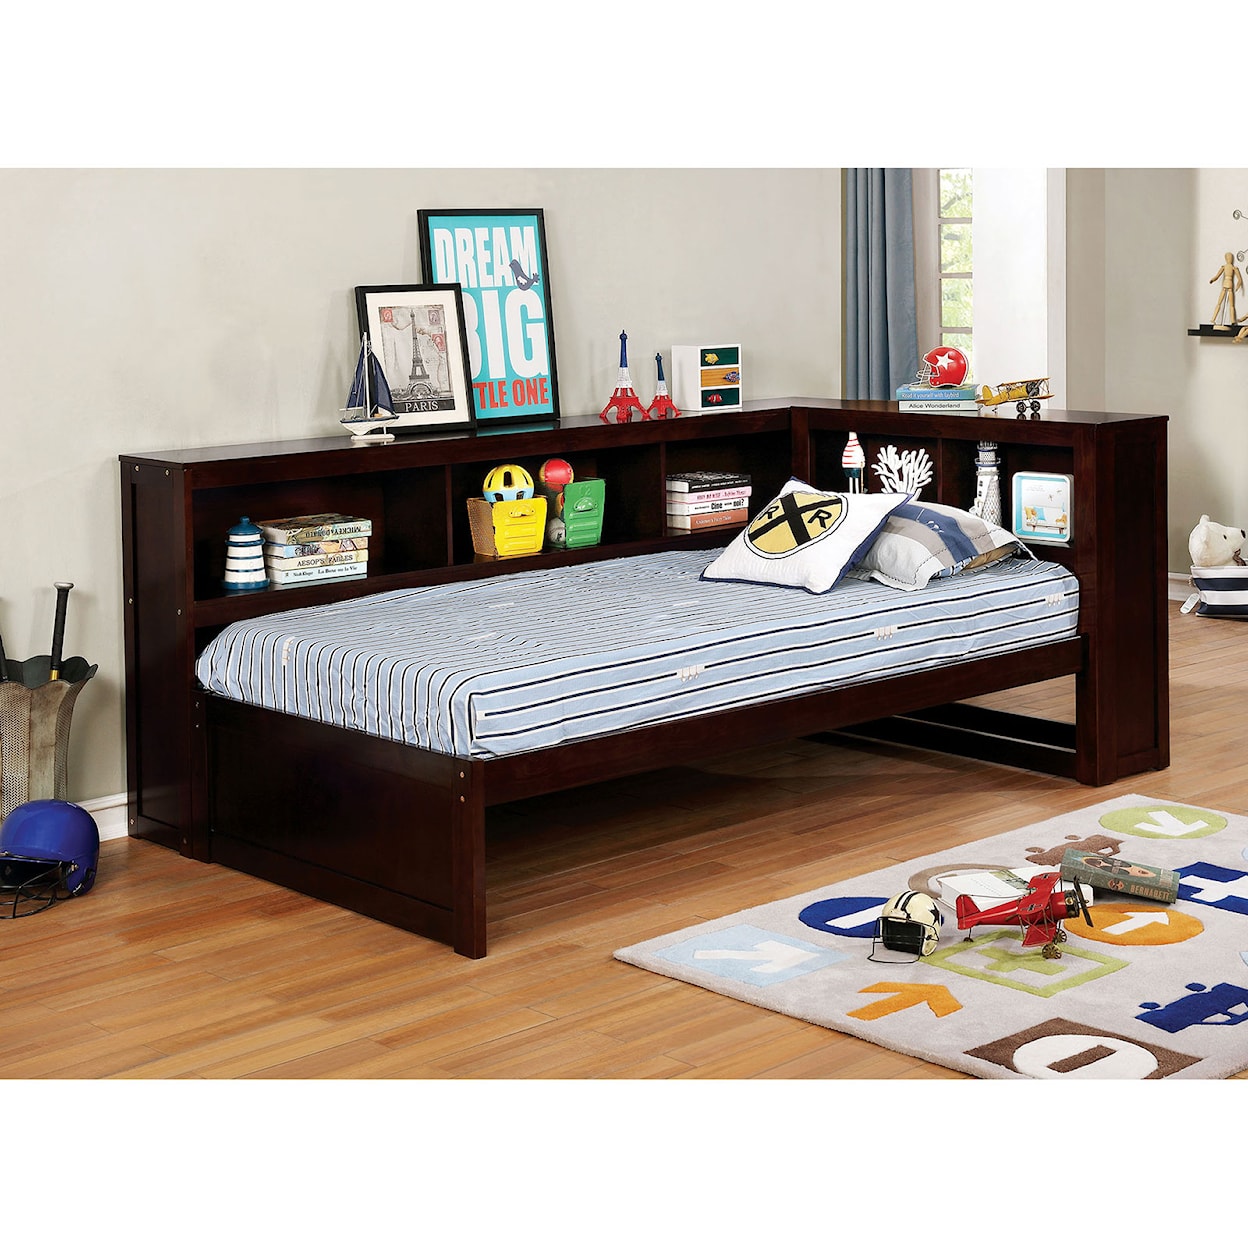 Furniture of America Frankie Full Daybed